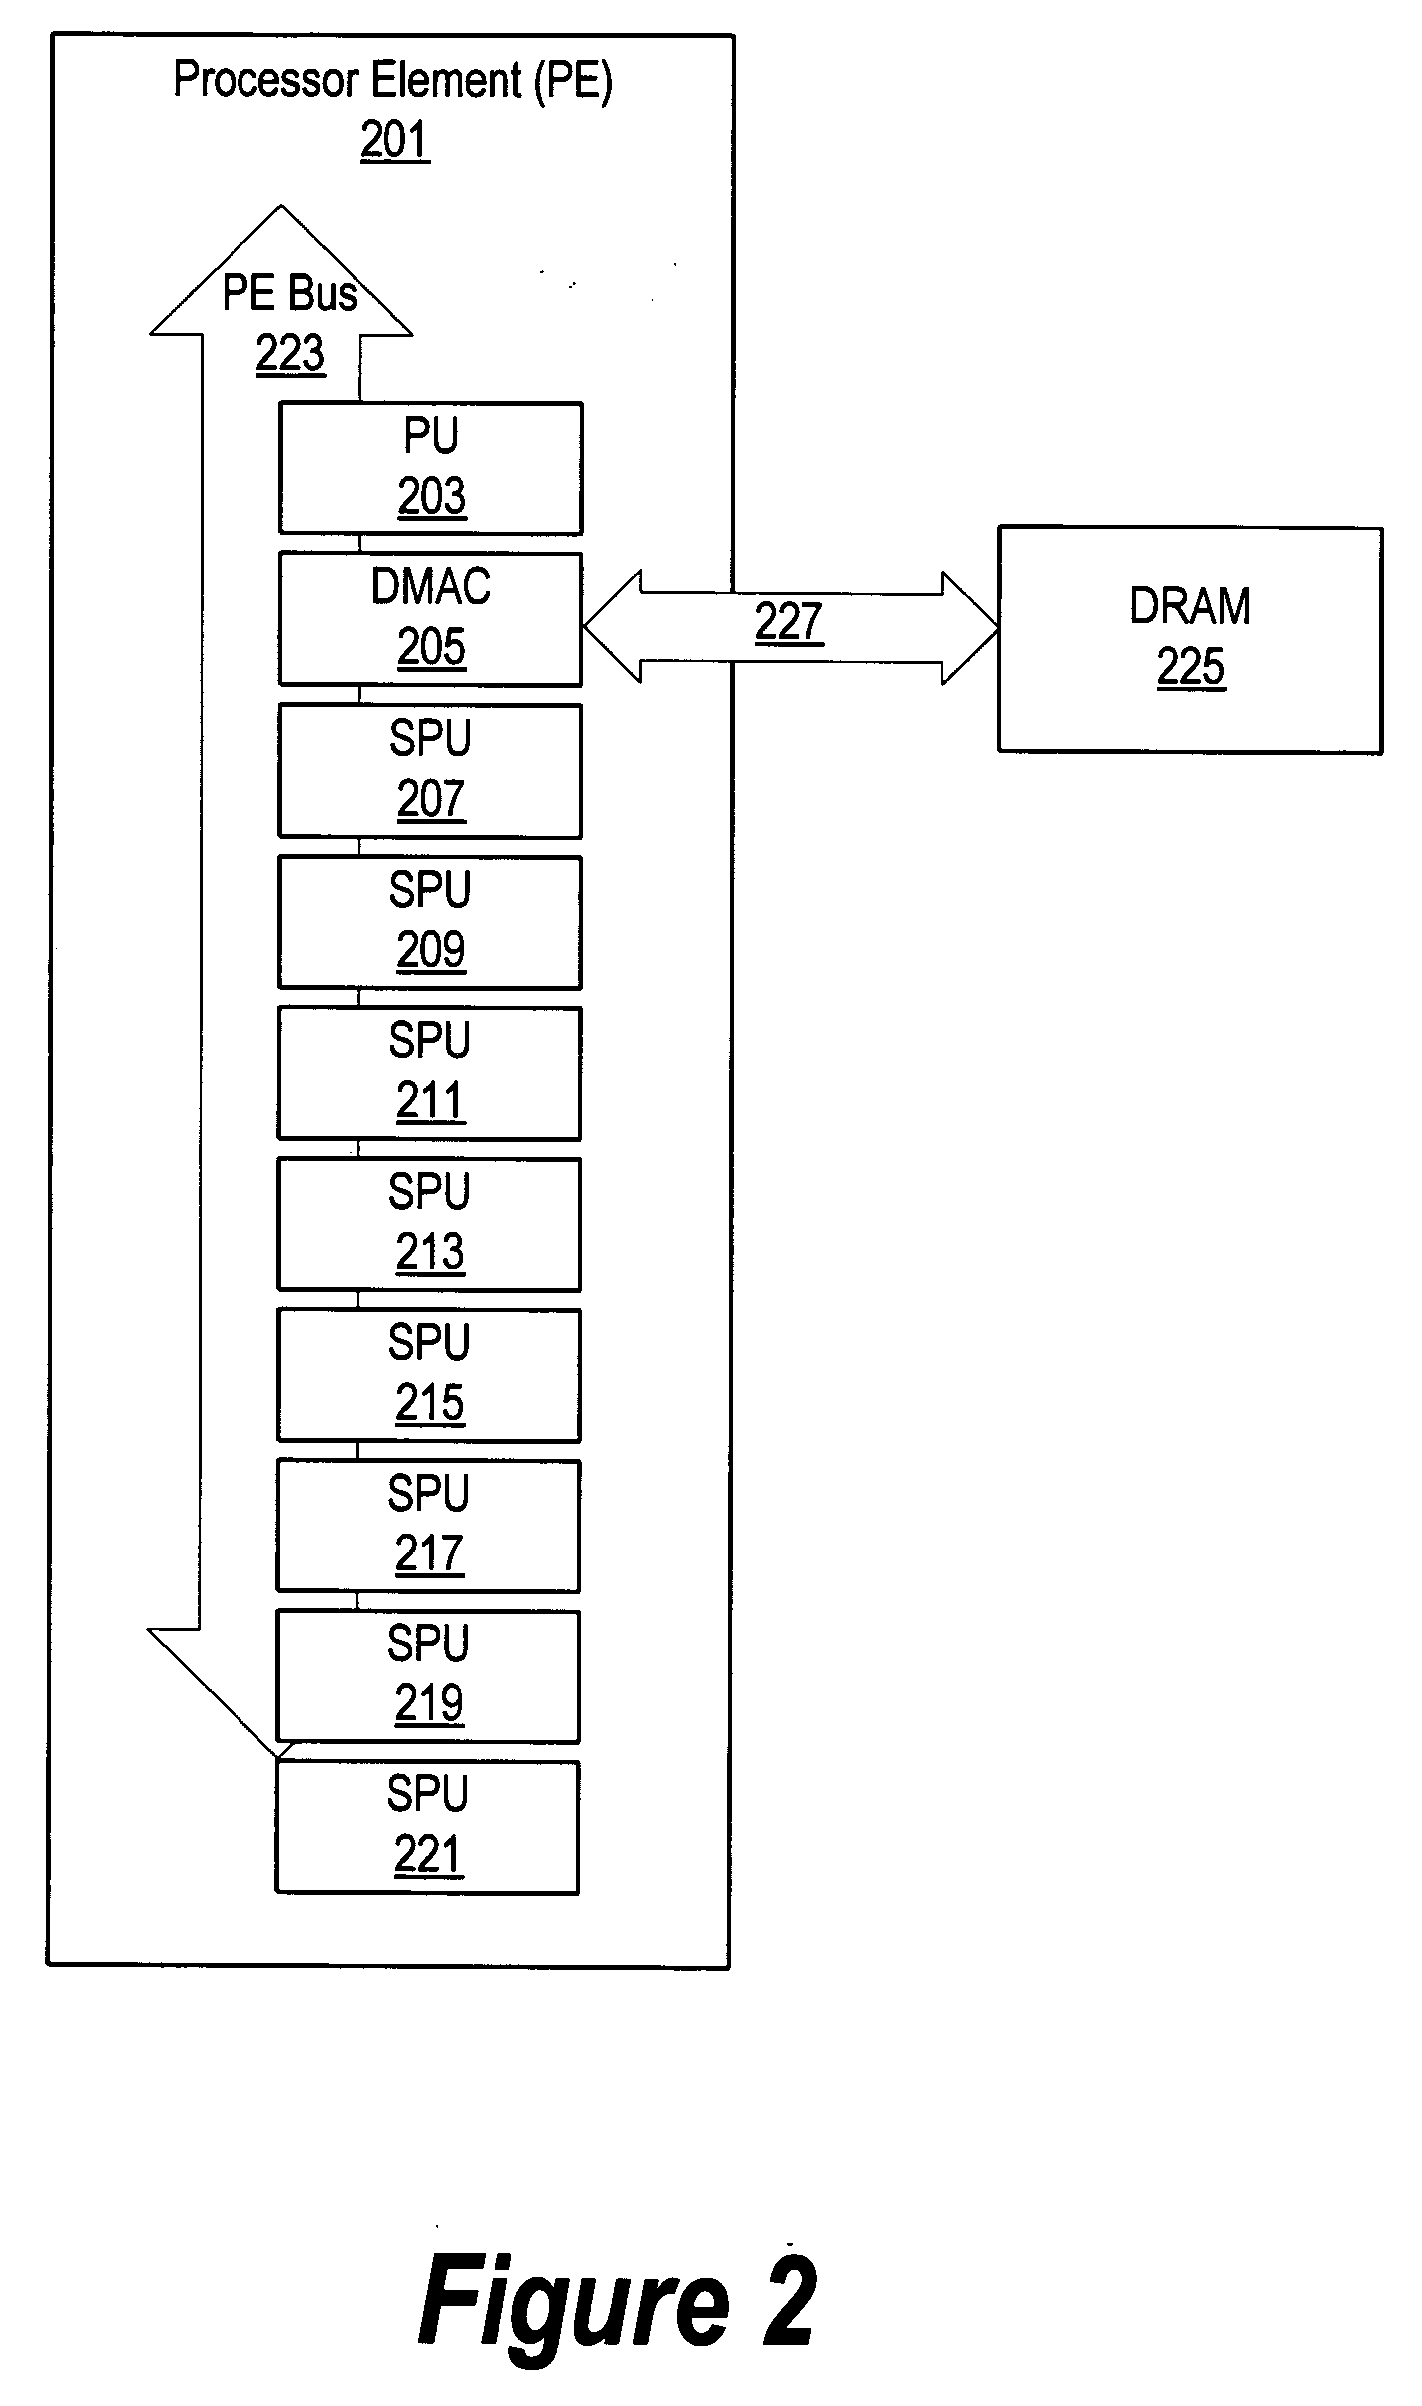 System and method for balancing computational load across a plurality of processors